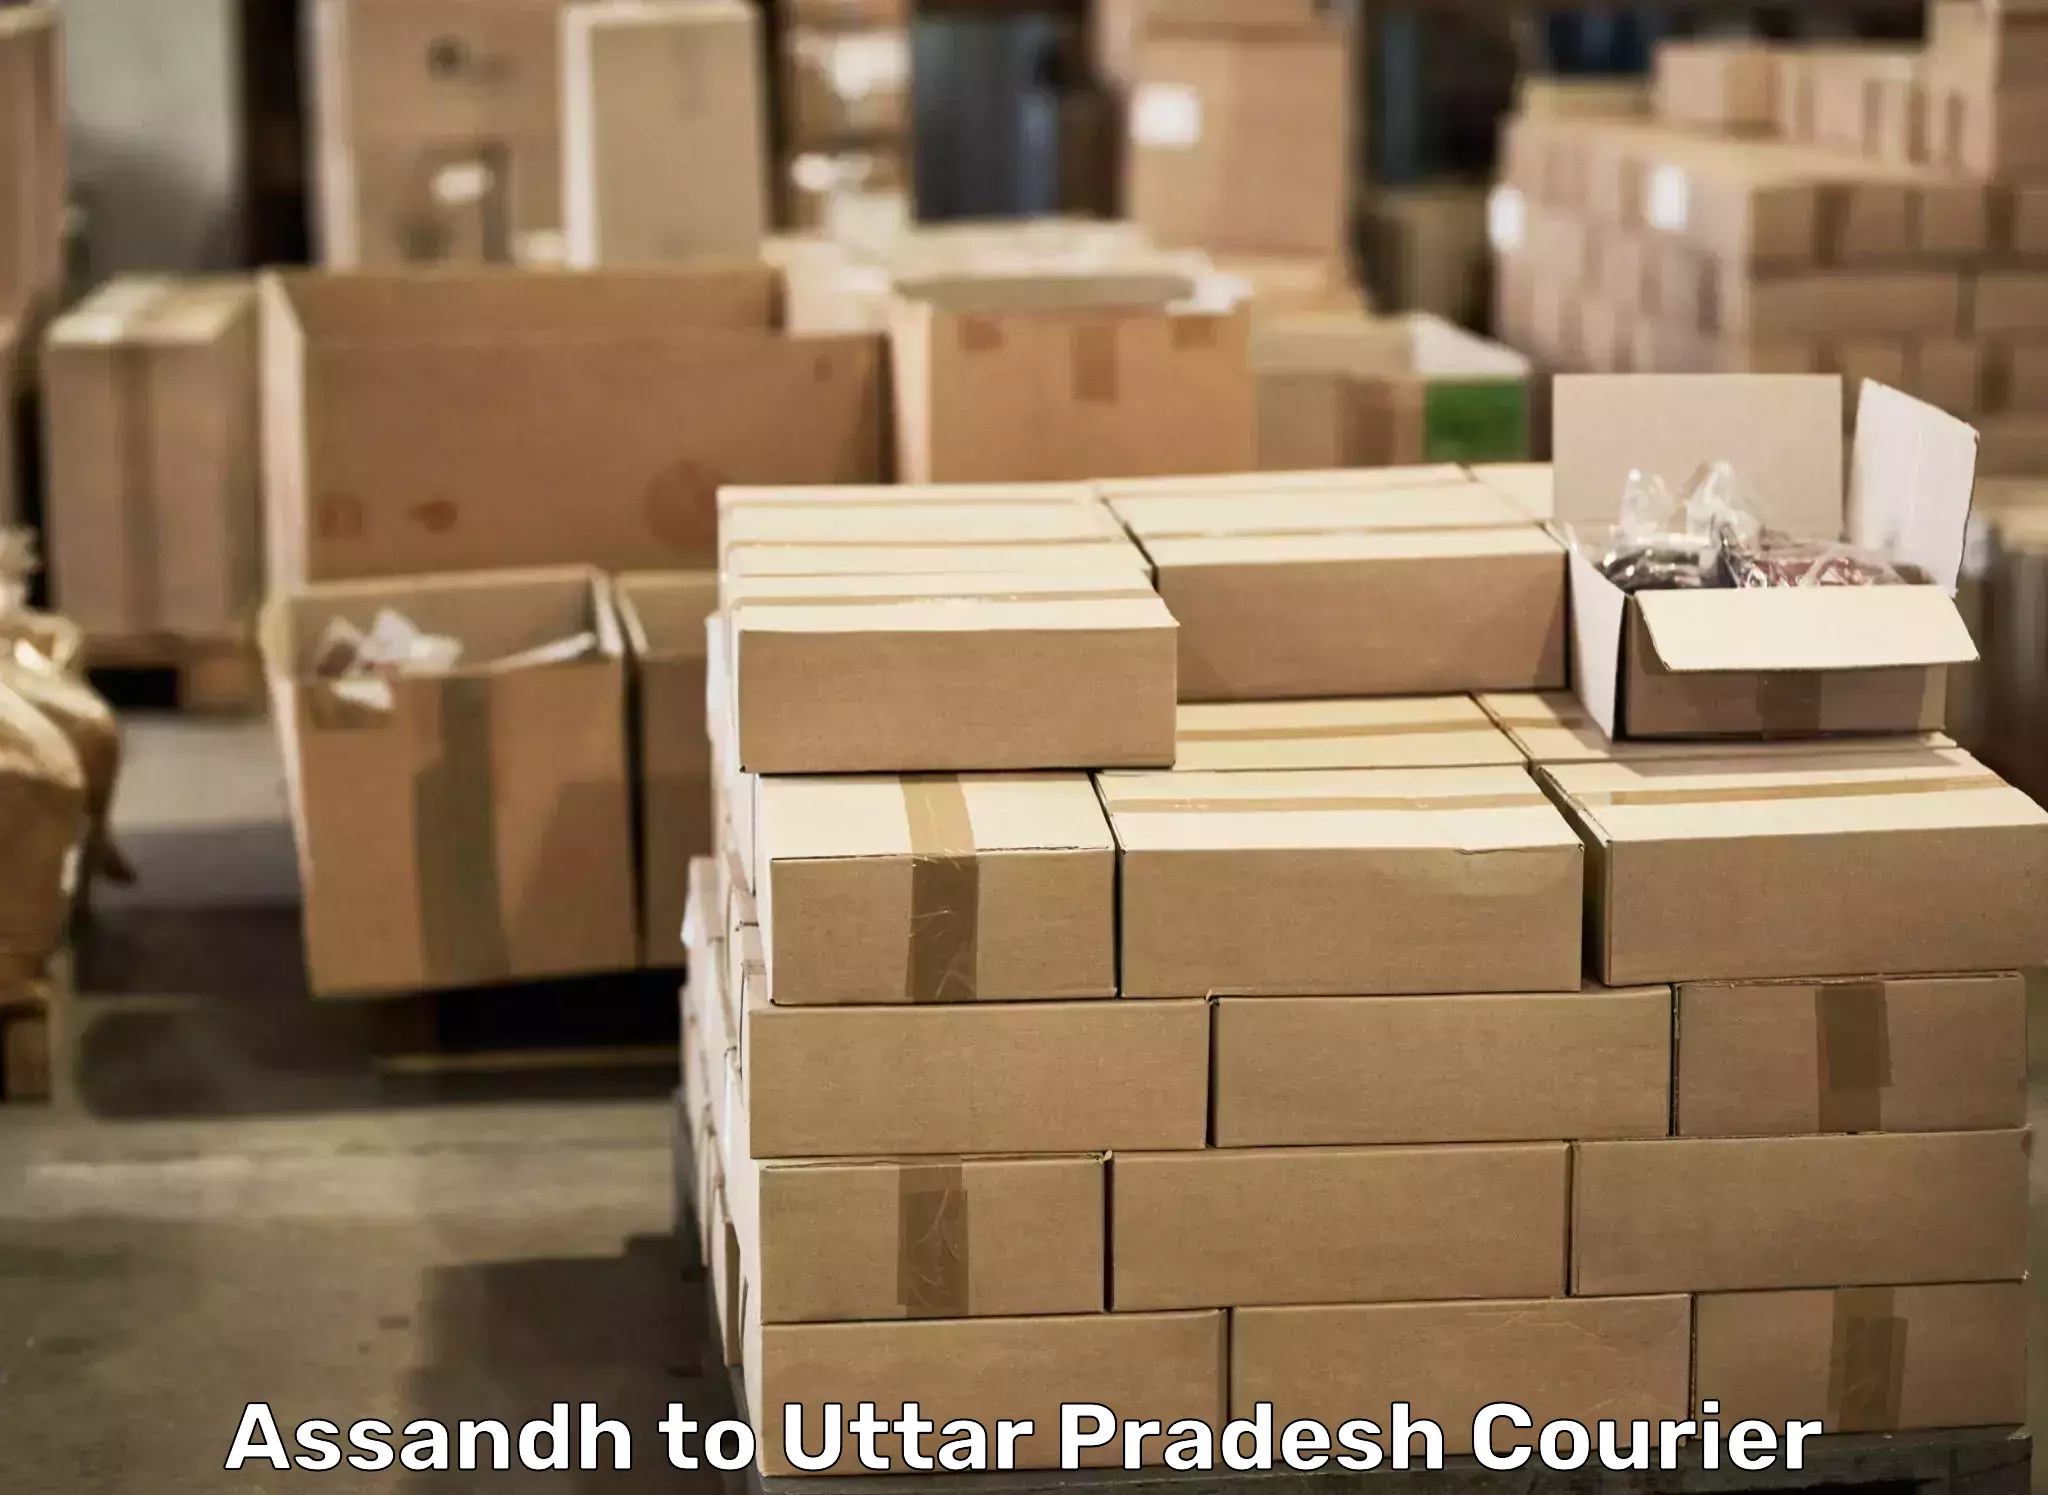 Efficient moving company in Assandh to Fatehpur